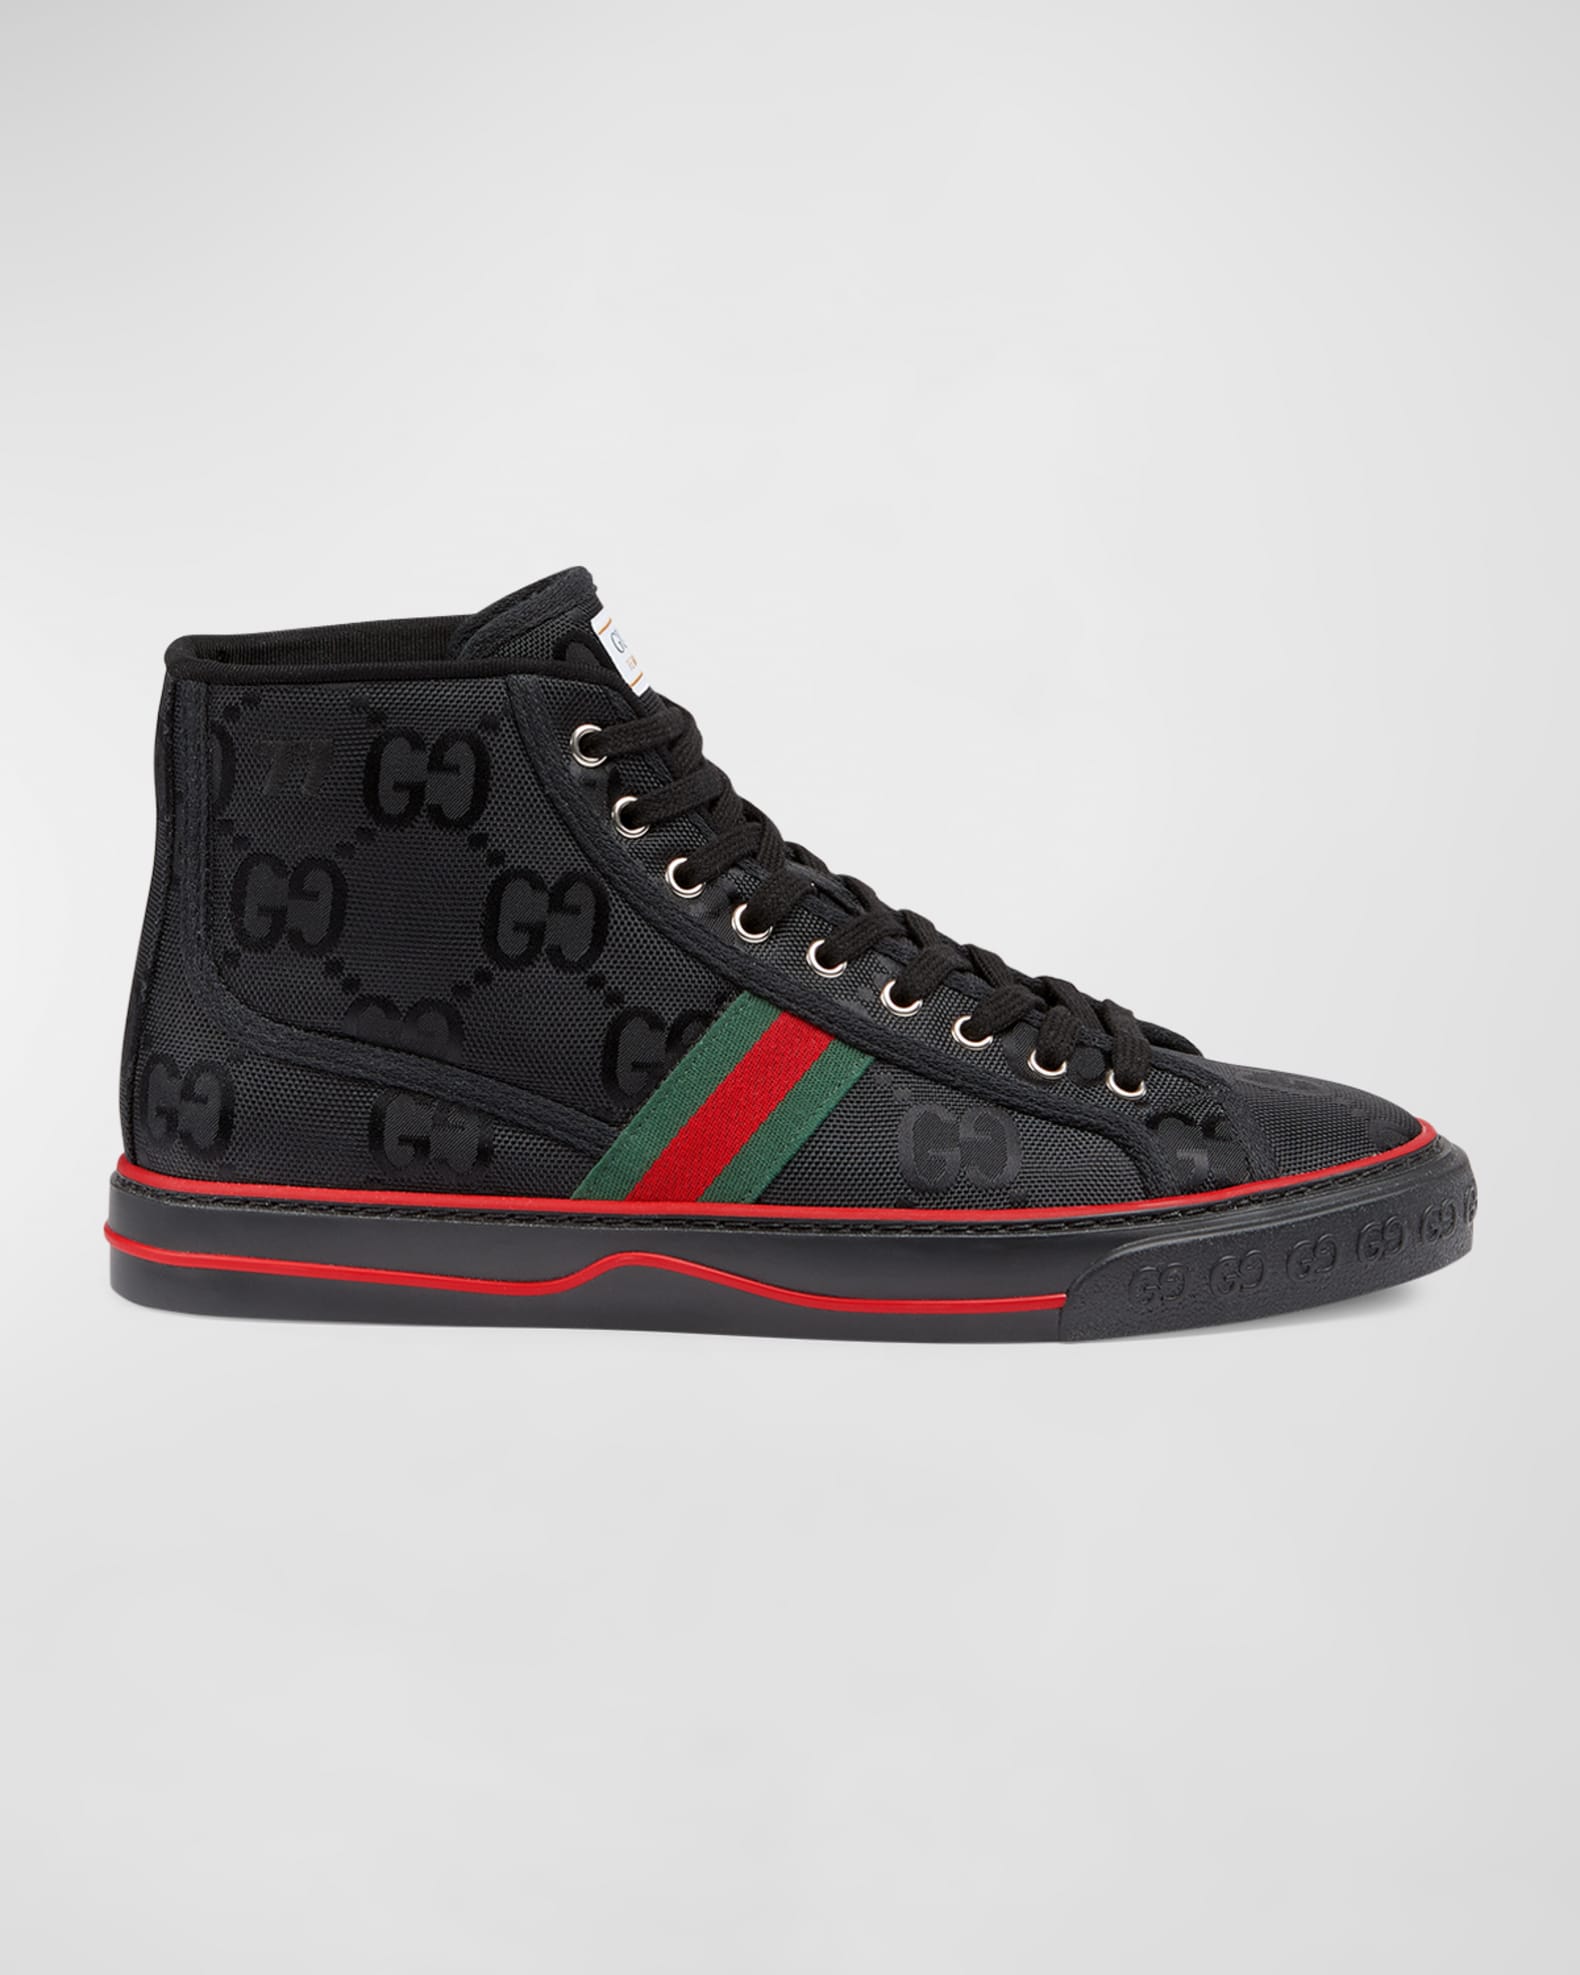 Gucci Men's Gucci Off The Grid Top Sneakers | Neiman Marcus